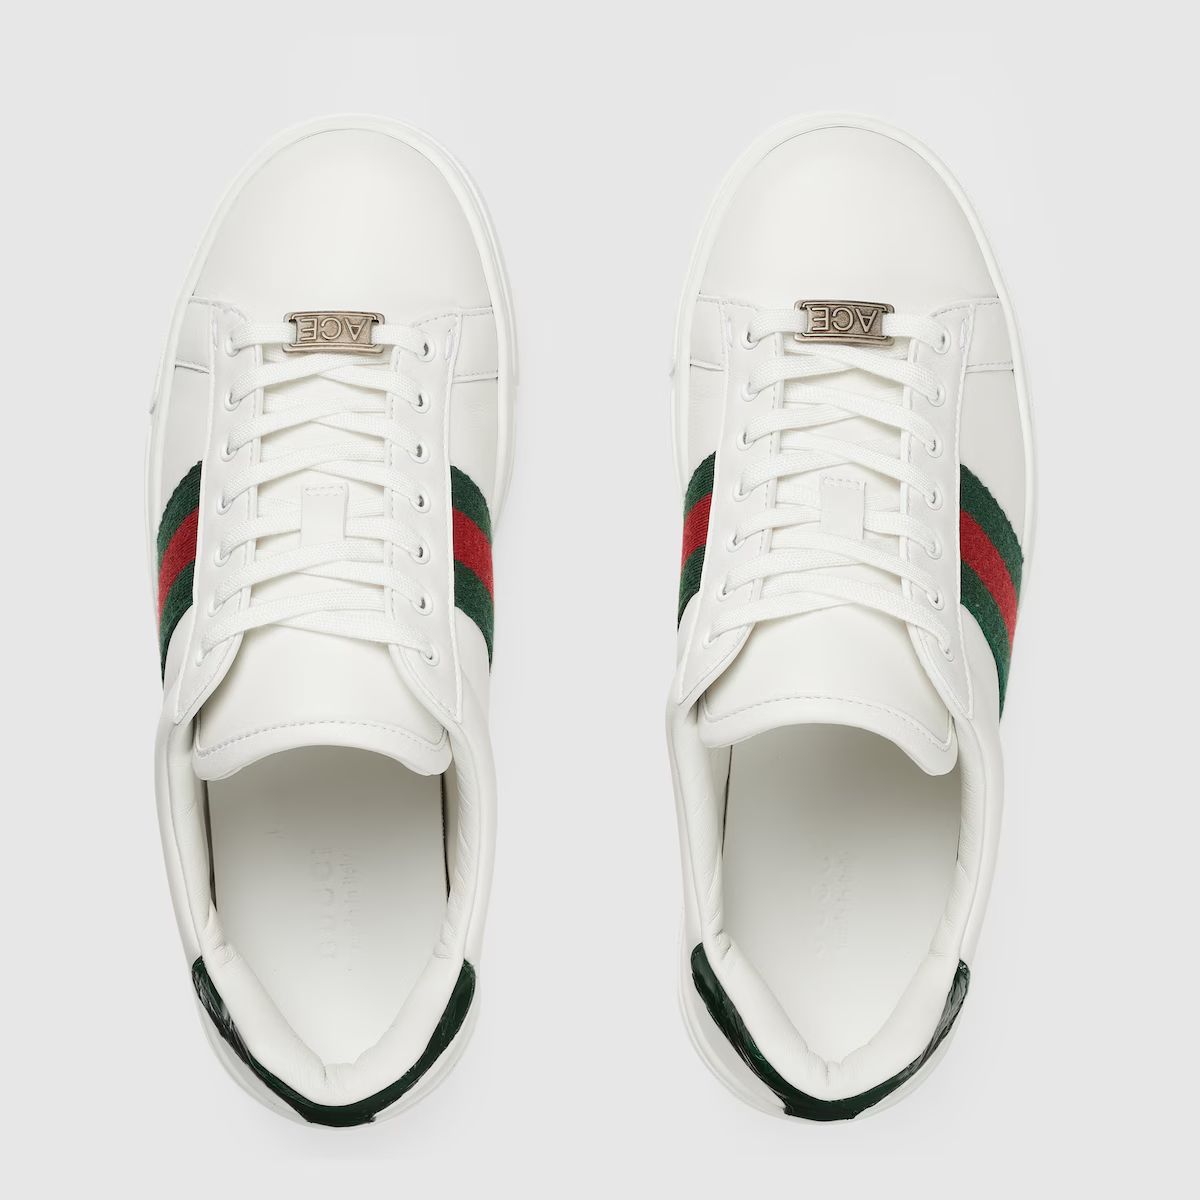 Women's Gucci Ace sneaker with Web | Gucci (US)